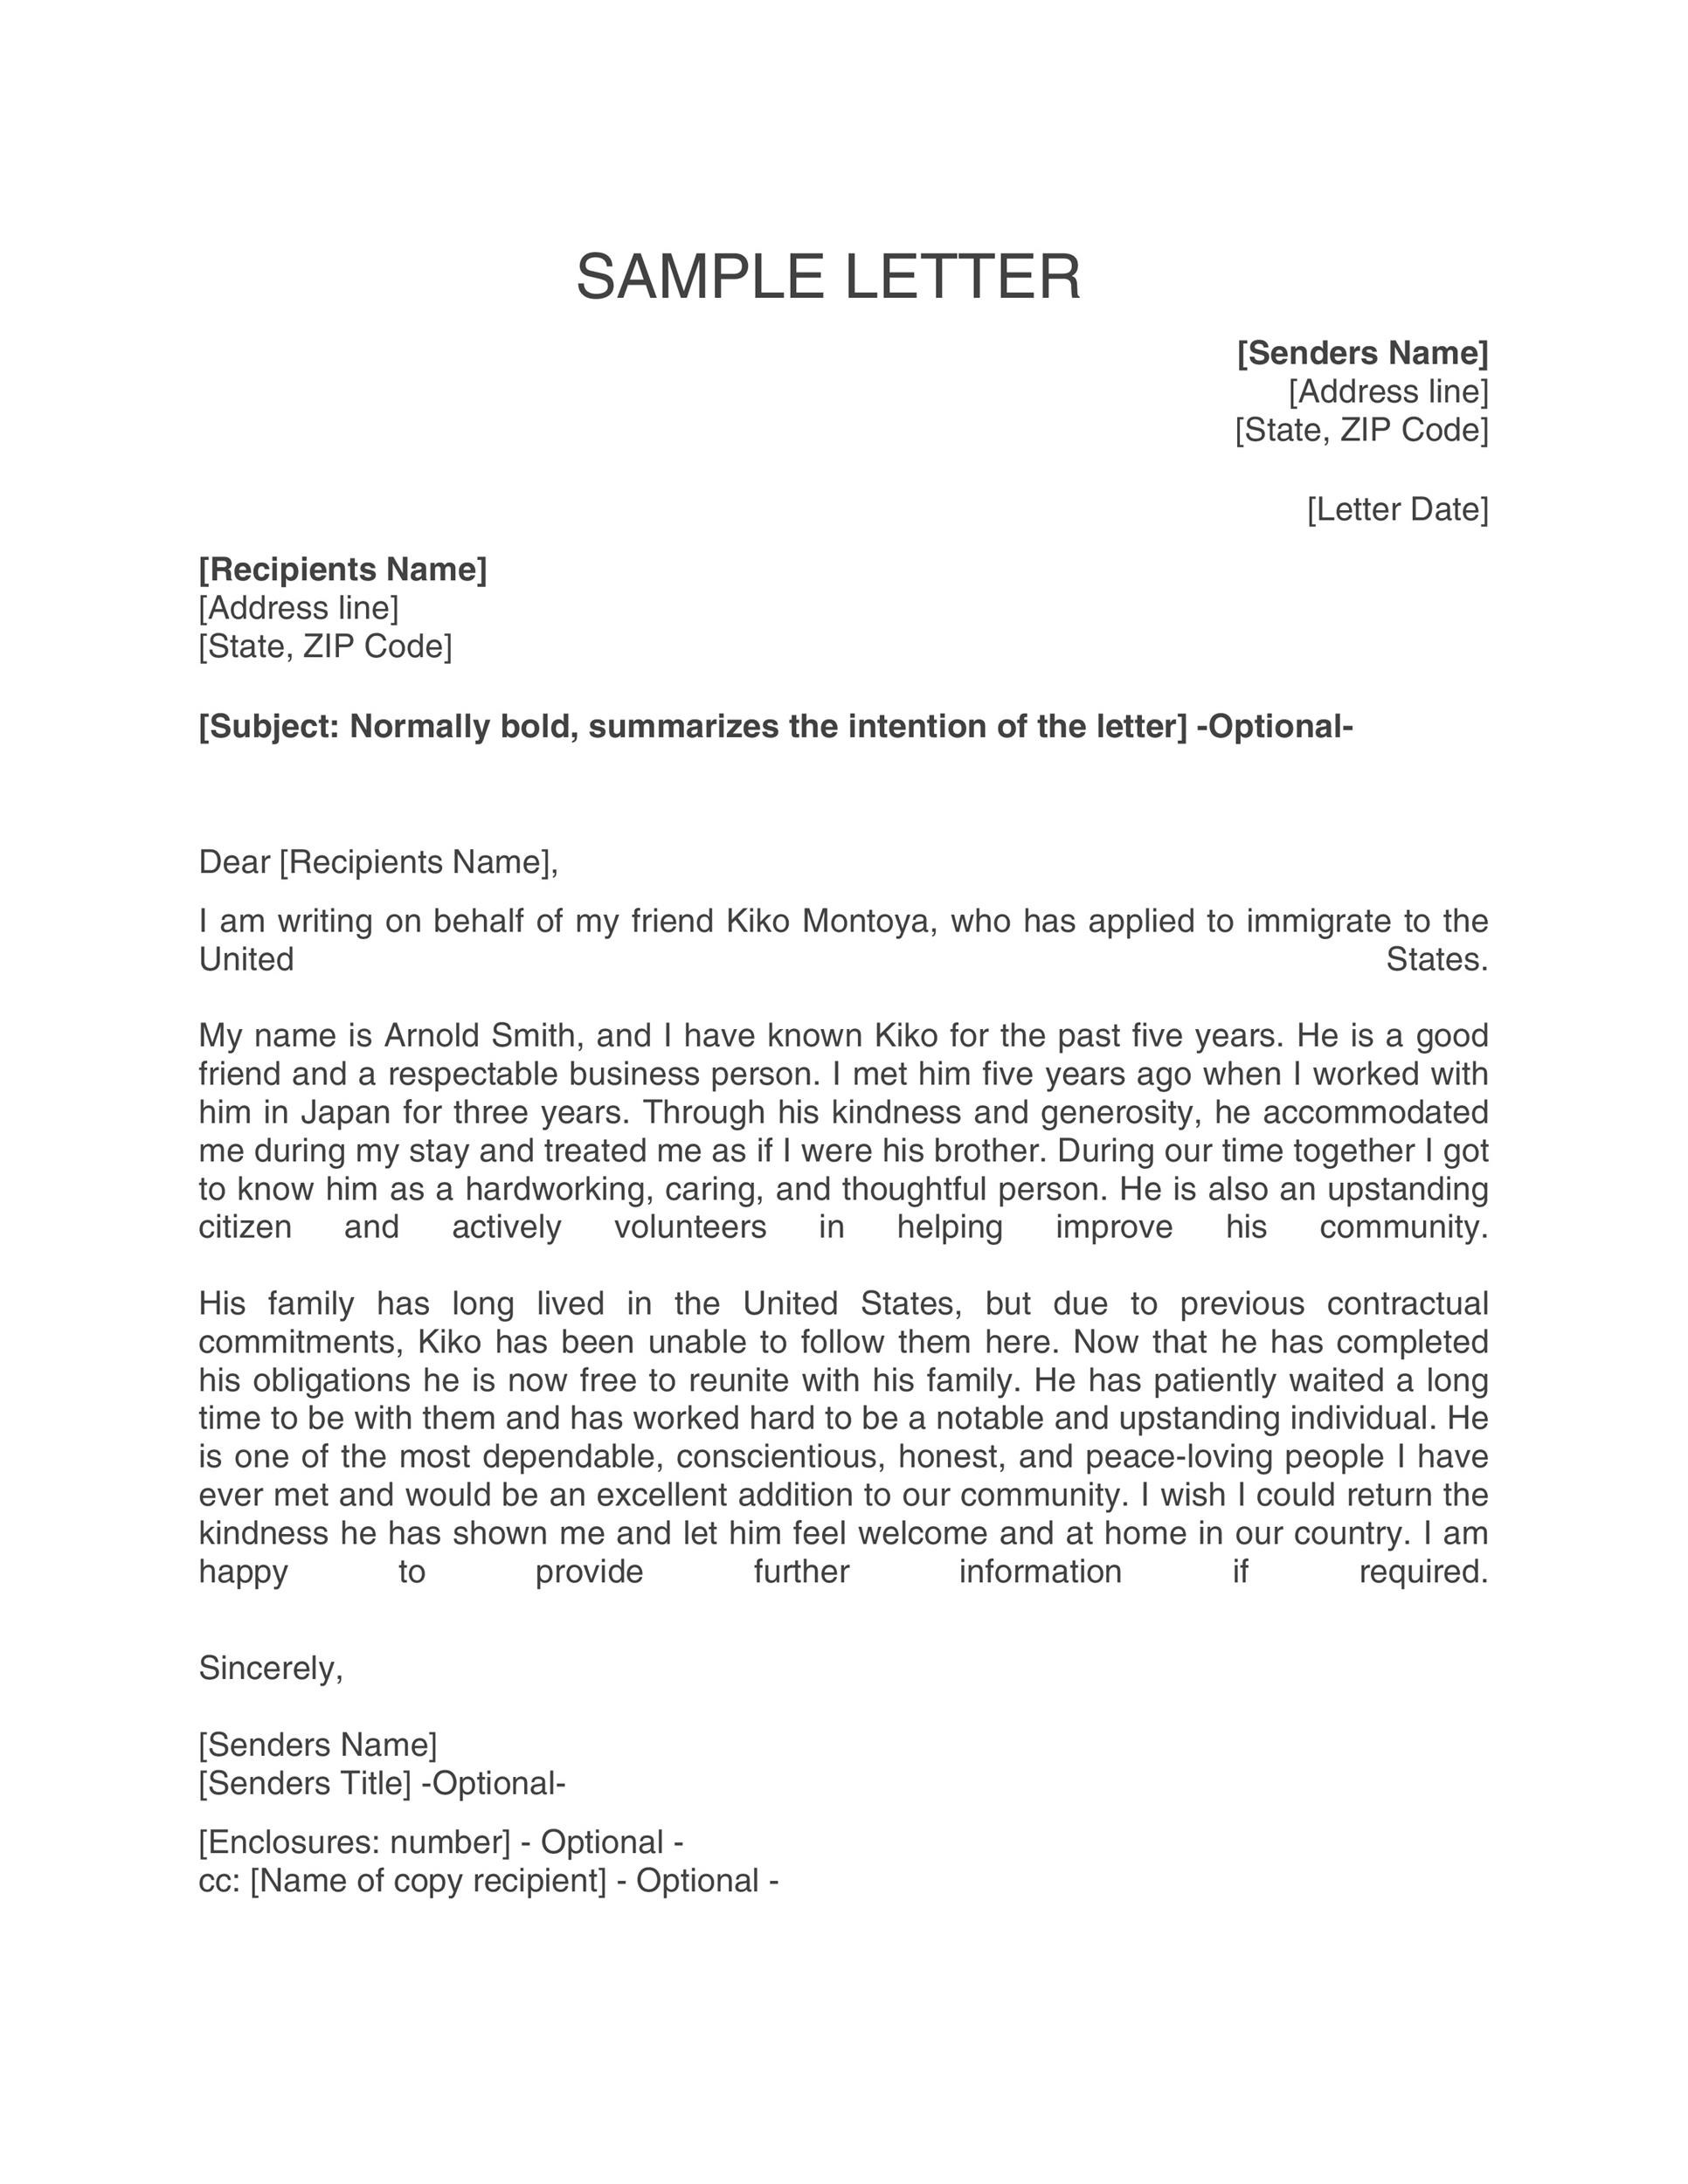 Letter Of Recommendation Template For Immigration from templatelab.com